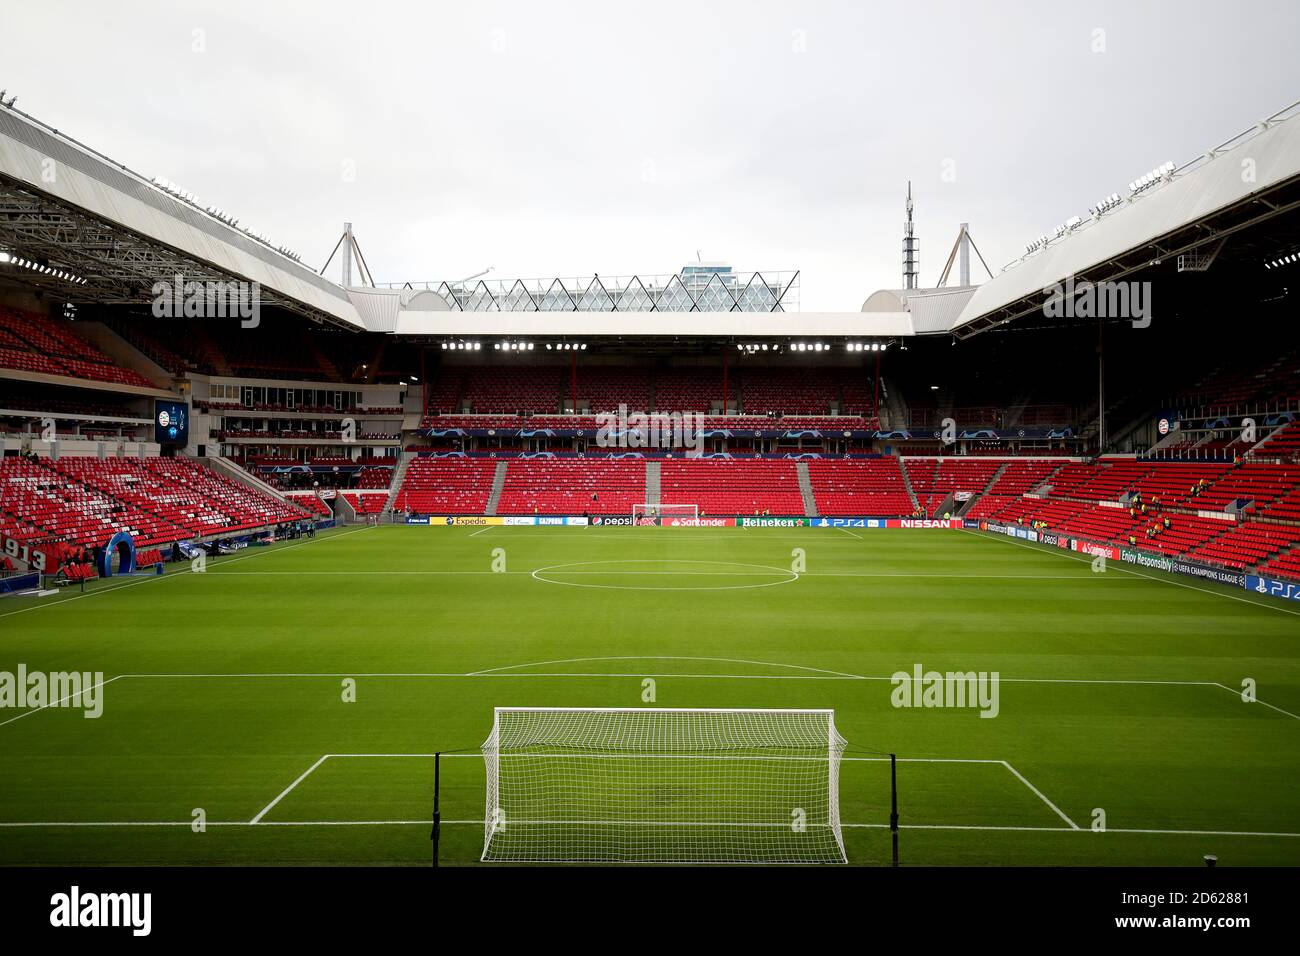 A general view of the Philips Stadion ahead of kick-off Stock Photo